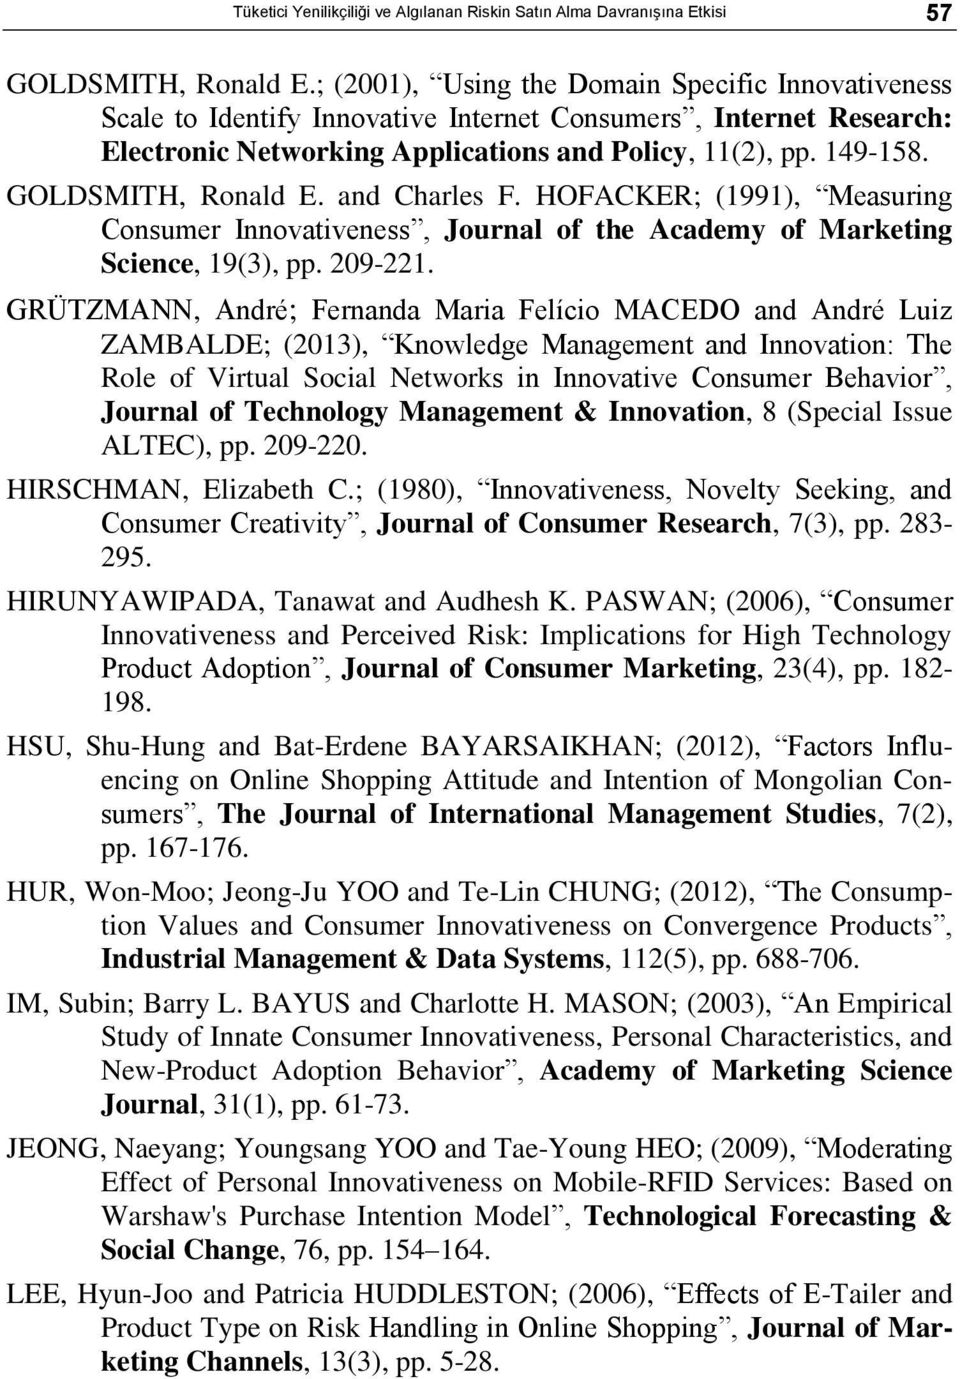 GOLDSMITH, Ronald E. and Charles F. HOFACKER; (1991), Measuring Consumer Innovativeness, Journal of the Academy of Marketing Science, 19(3), pp. 209-221.